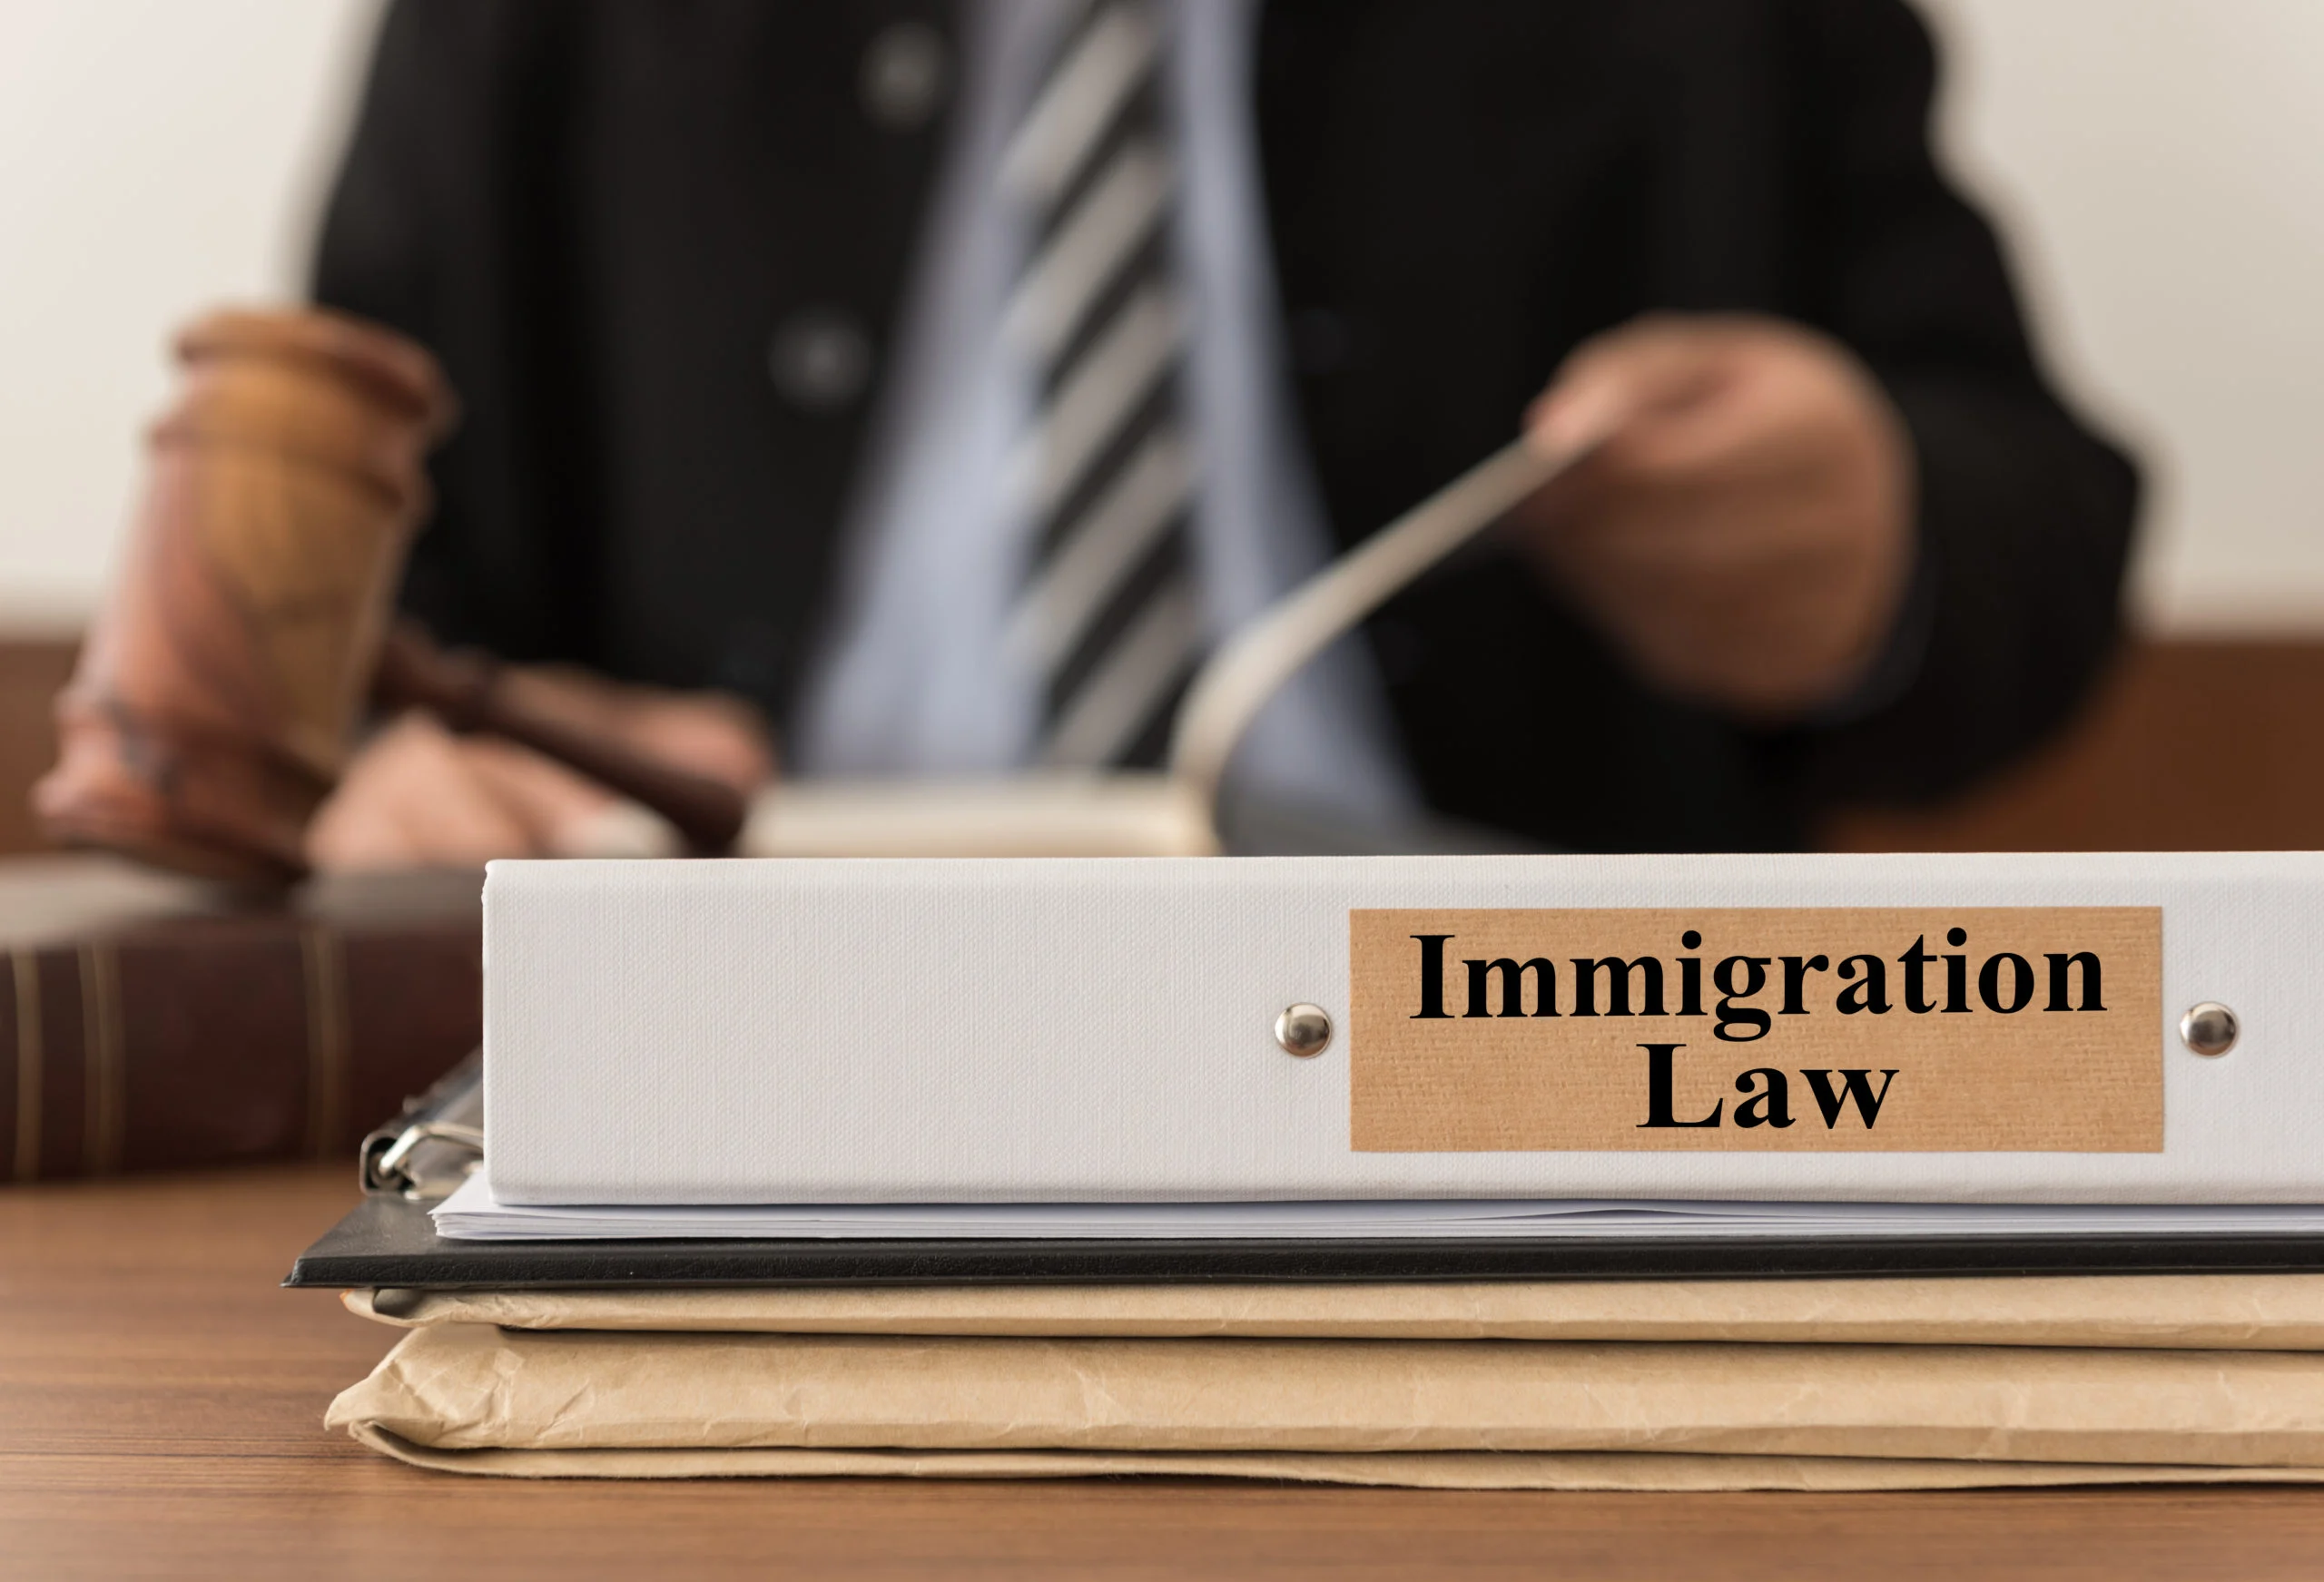 Are you facing immigration issues?